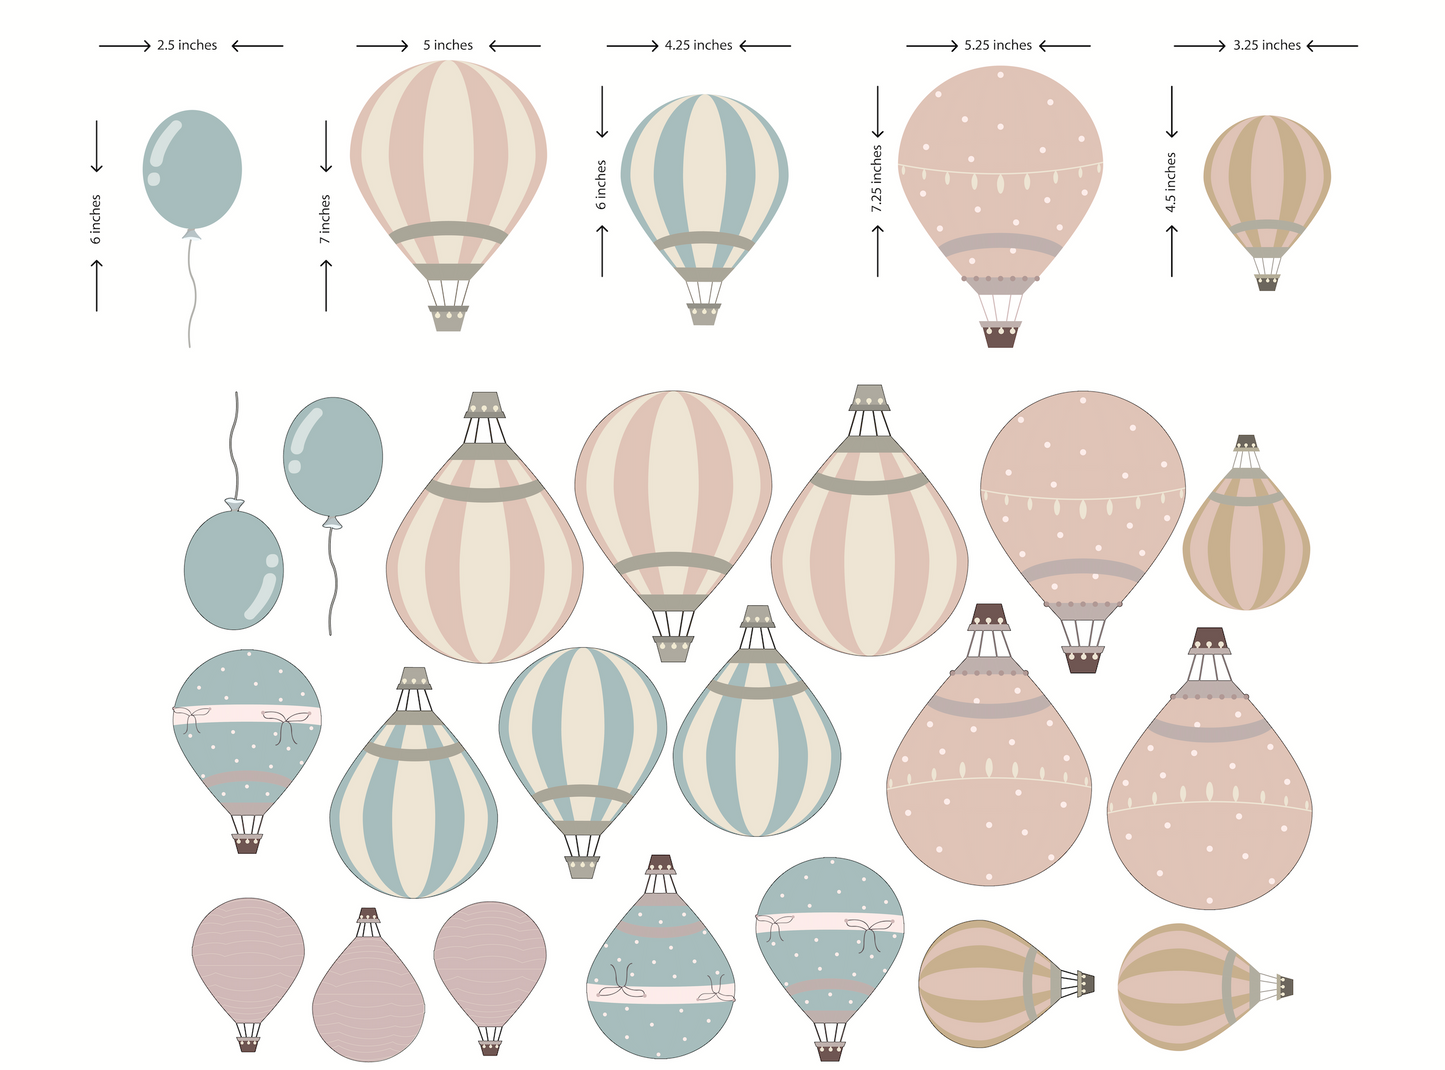 Hot Air Balloons and Animals - Sticker Decals